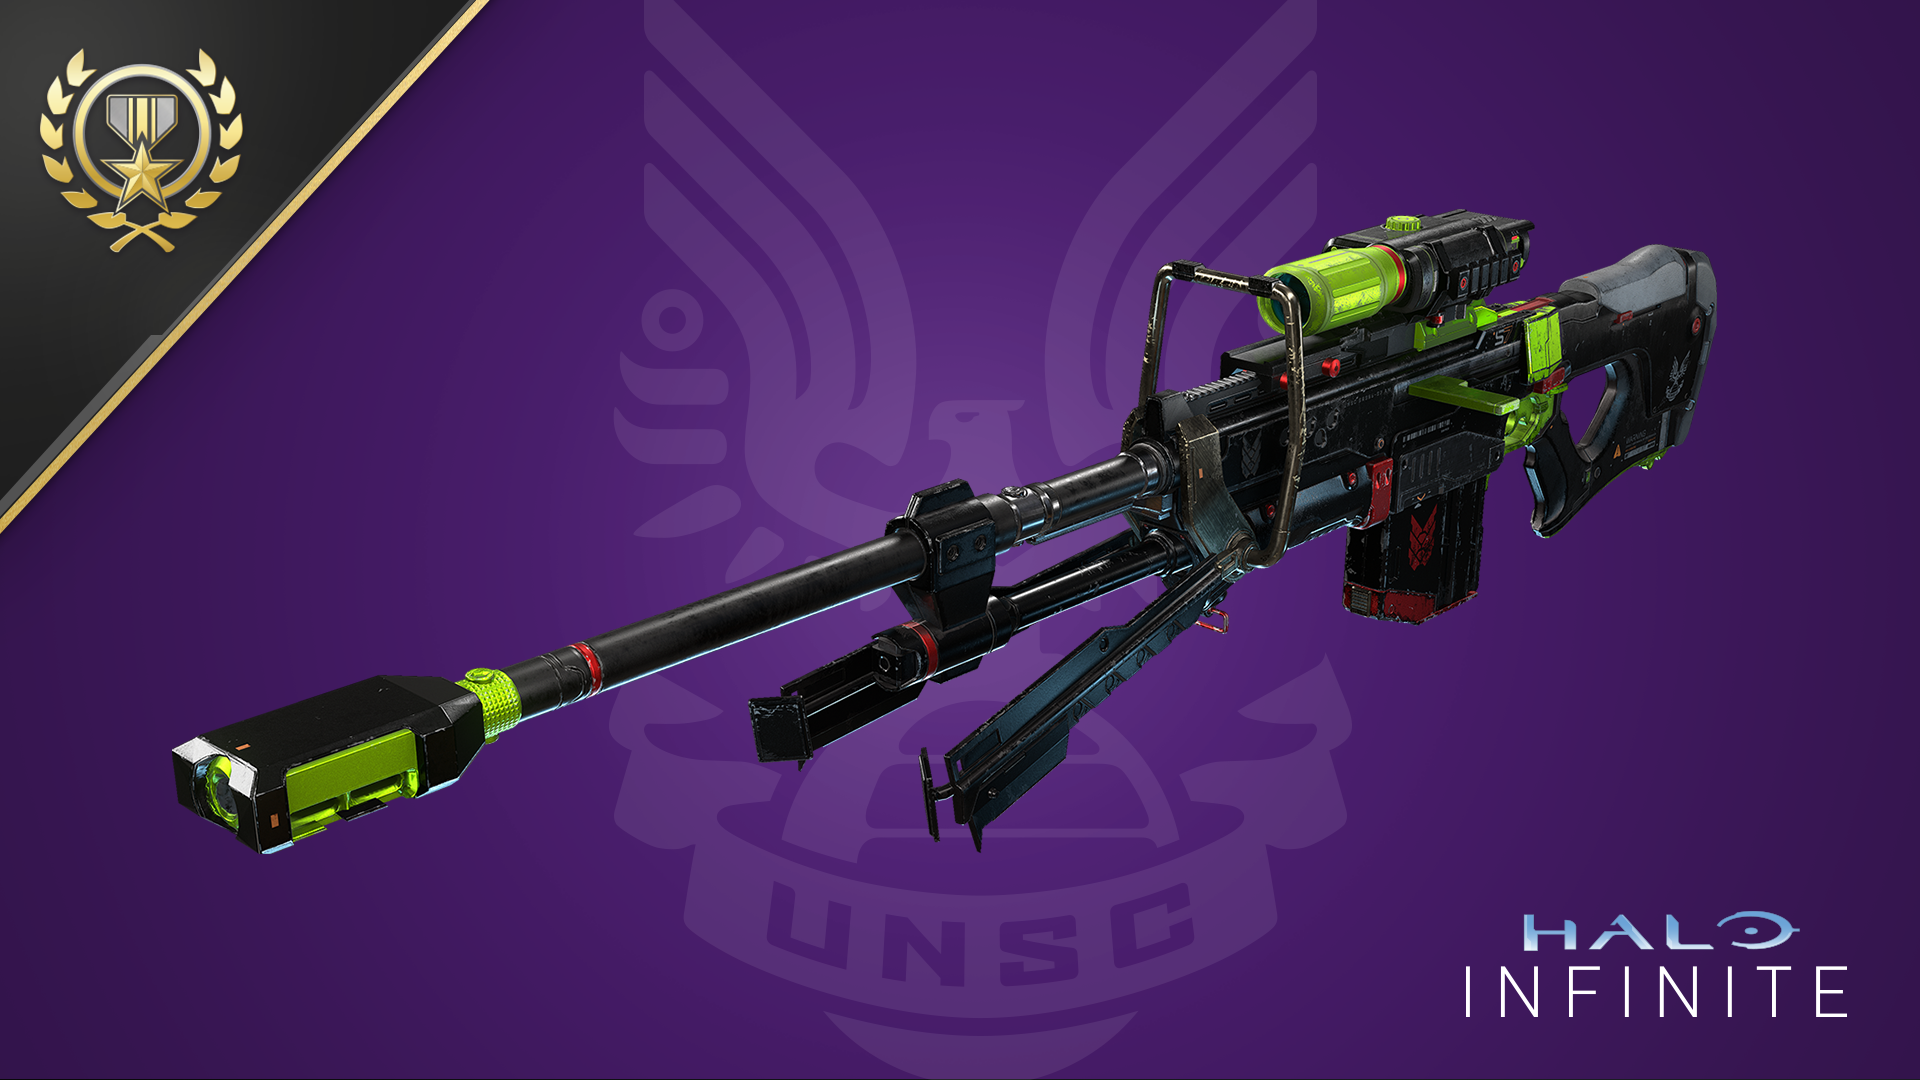 Image of Halo Infinite S7 Sniper with Abbey Lime coating